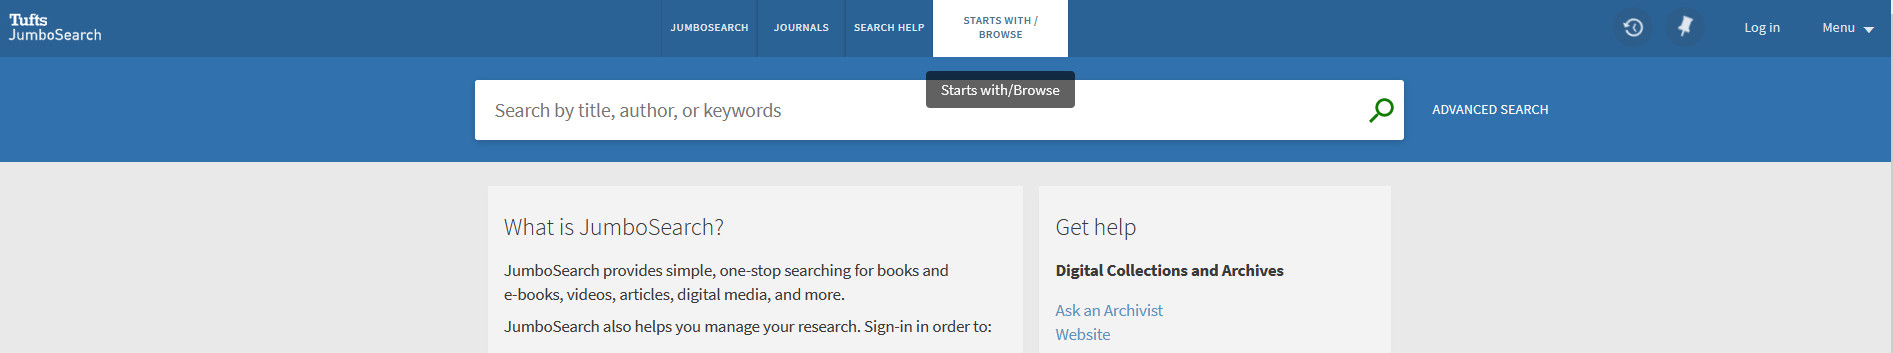 Screenshot of JumboSearch homepage with the Browse link highlighted